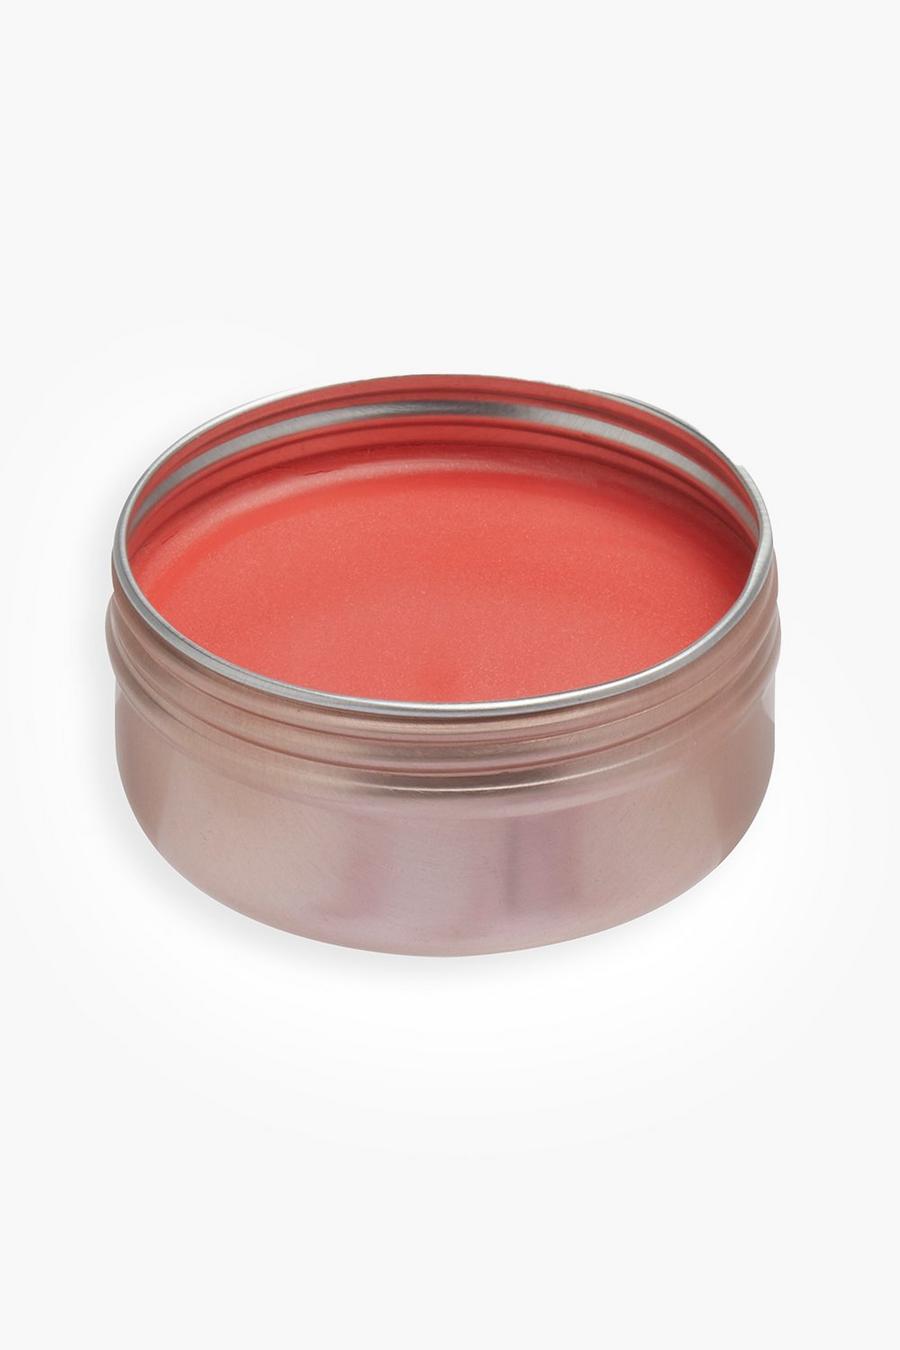 Revolution Balm Glow, Peach bliss image number 1